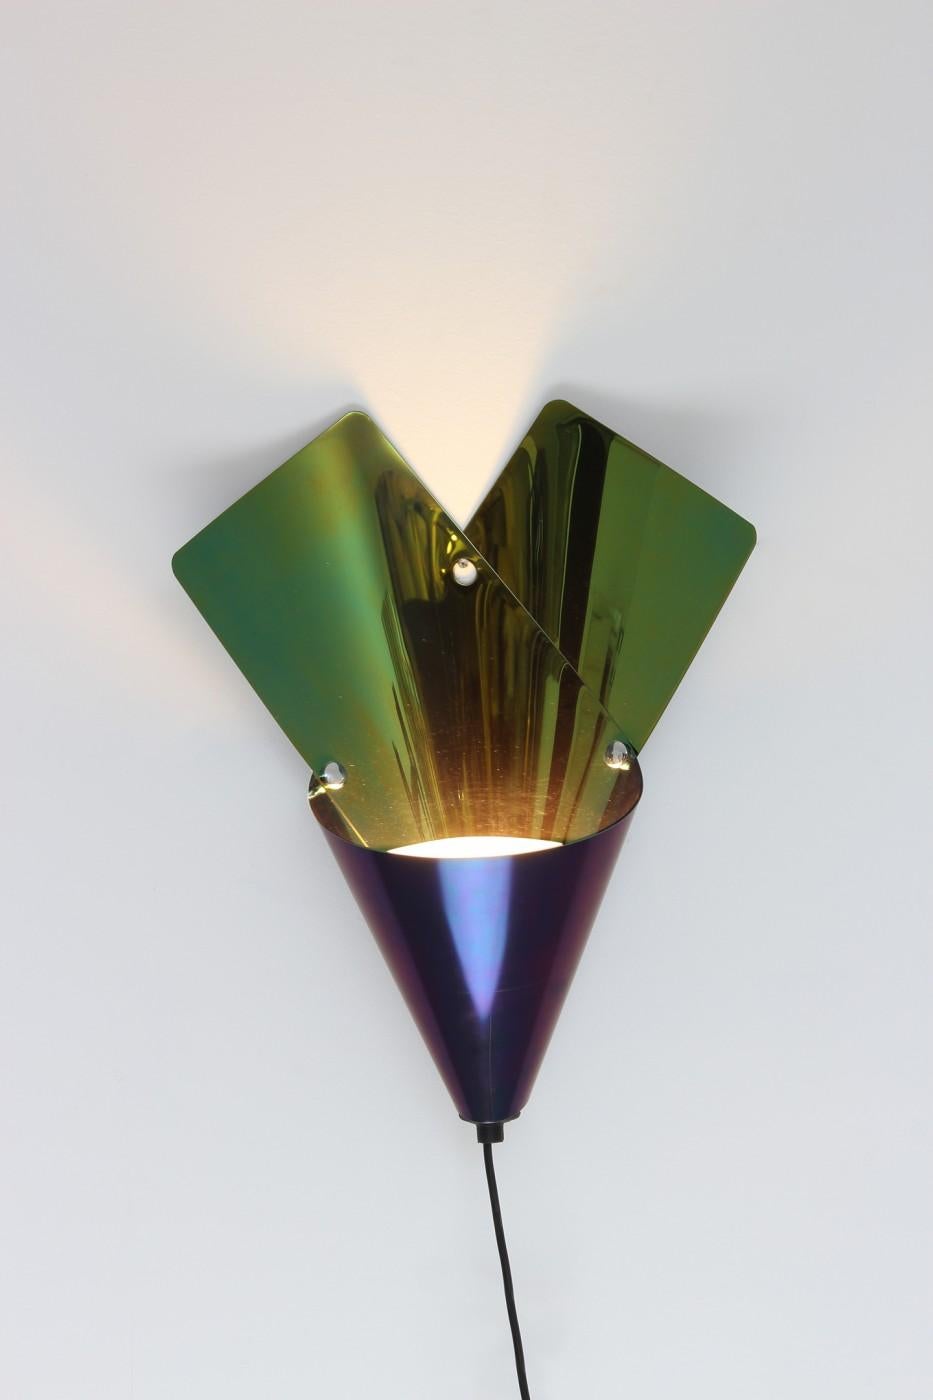 Electro-colored steel, chrome-plated studs, the shape of the Azucena Cartoccio wall light is inspired by the paper cones Milanese street vendors sell hot chestnuts. A combination of old and new, the piece makes a bold statement while providing